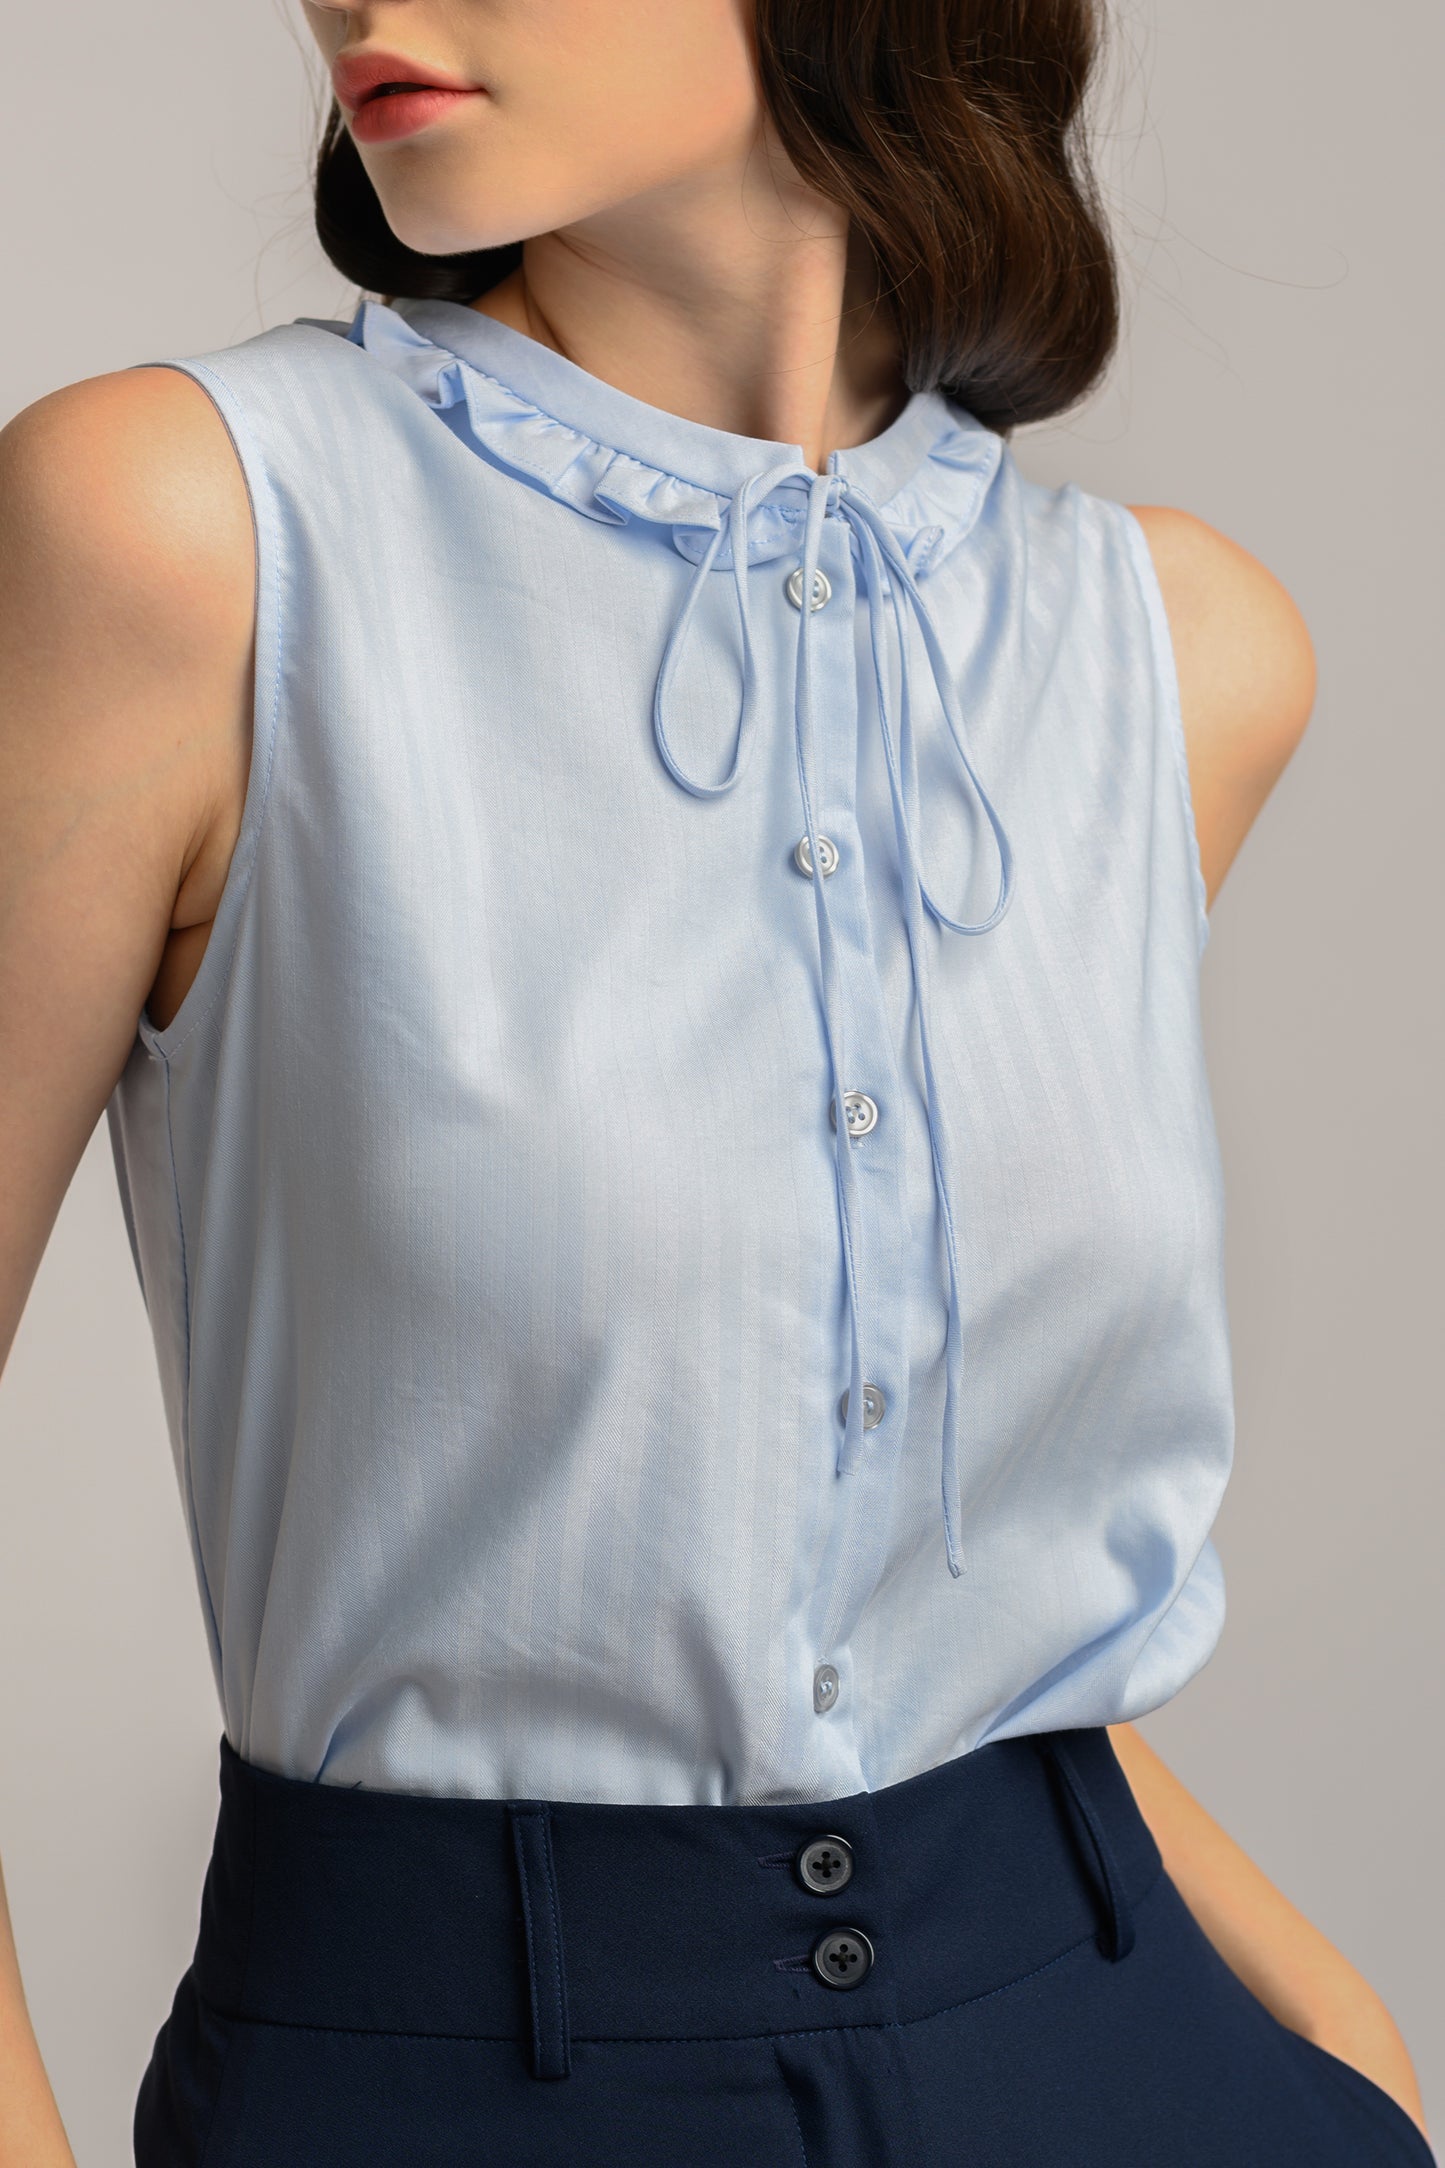 Blouse With Frill Trim Collar - Frost Blue